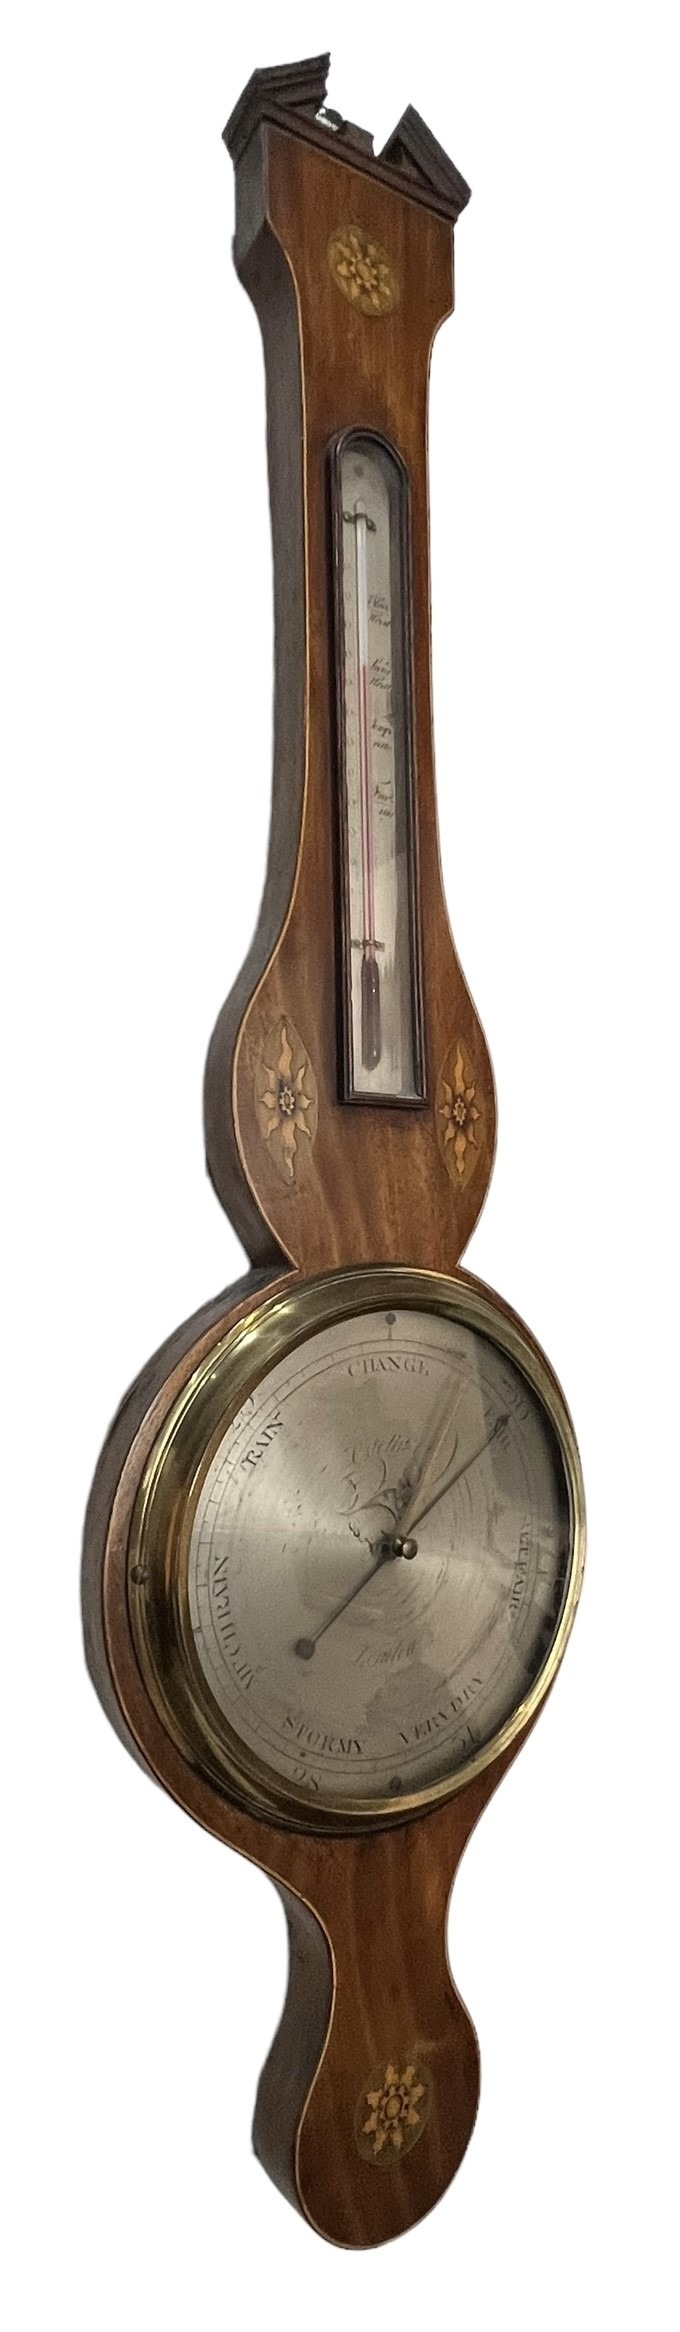 ORTELLI & CO., A GEORGE III INLAID MAHOGANY BANJO BAROMETER The dial signed Ortelli & Co., London, - Image 3 of 4